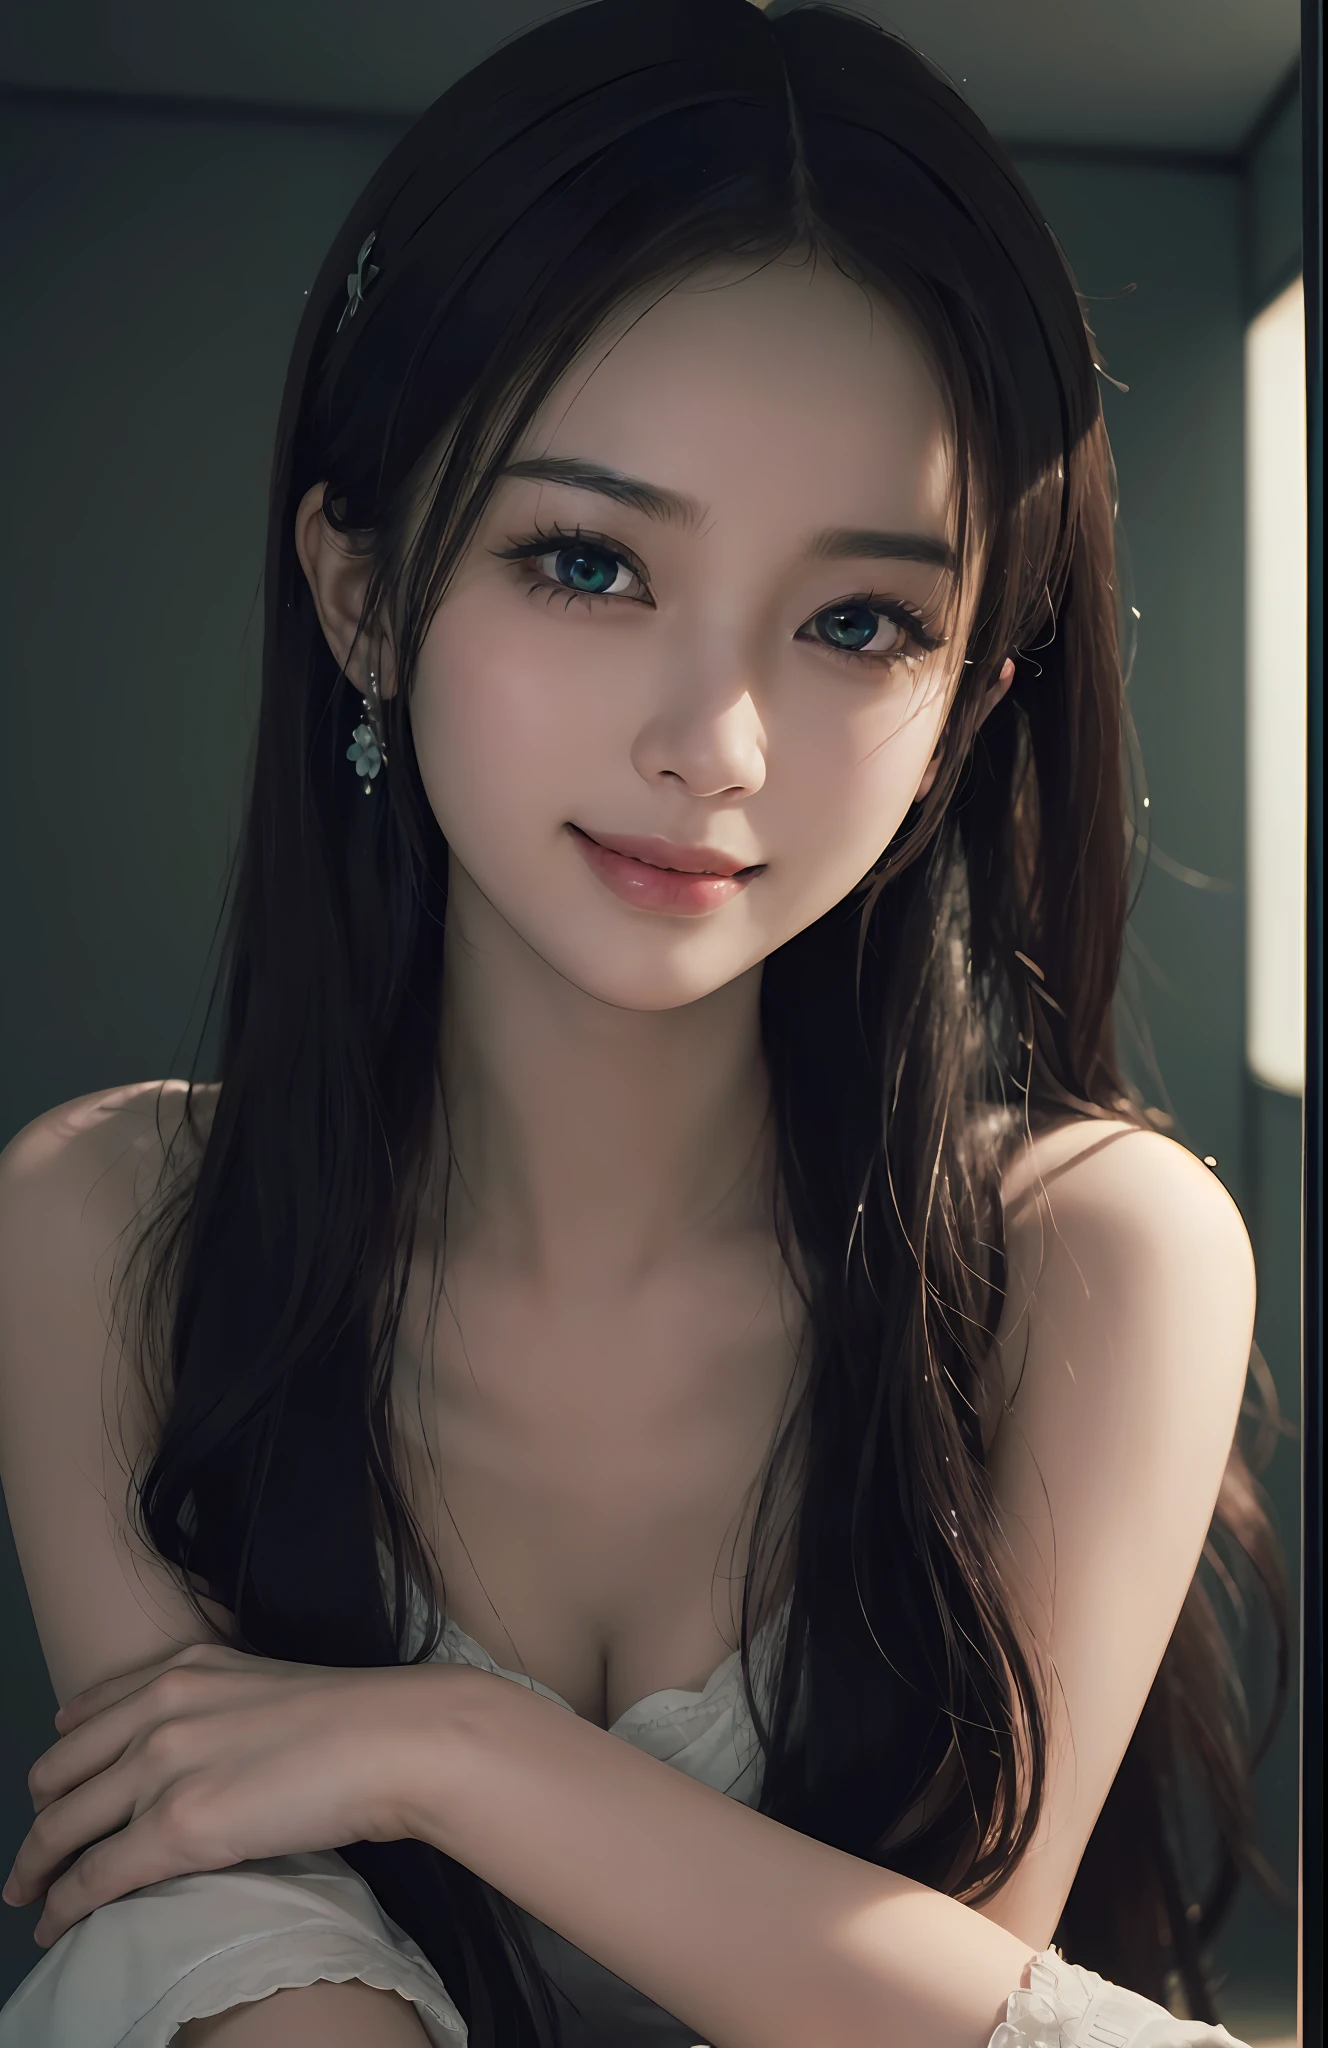 Masterpiece, 1 Beautiful Girl, Detailed Eyes, Swollen Eyes, Best Quality, Ultra High Resolution, (Reality: 1.4), Original Photo, 1Girl, Green Eyes, Cinematic Lighting, Smiling, Japanese, Asian Beauty, Korean, Clean, Super Beautiful, Little Young Face, Beautiful Skin, Slender, Cyberpunk (ultra realistic), (illustration), (high resolution), (8K), (very detailed), (best illustration), (beautifully detailed eyes), (super detailed), (wallpaper), (detailed face), viewer looking, fine details, detailed face, in the dark, deep shadow, low key, pureerosfaceace_v1, smile, Long hair, Straight hair, 46 point diagonal bangs